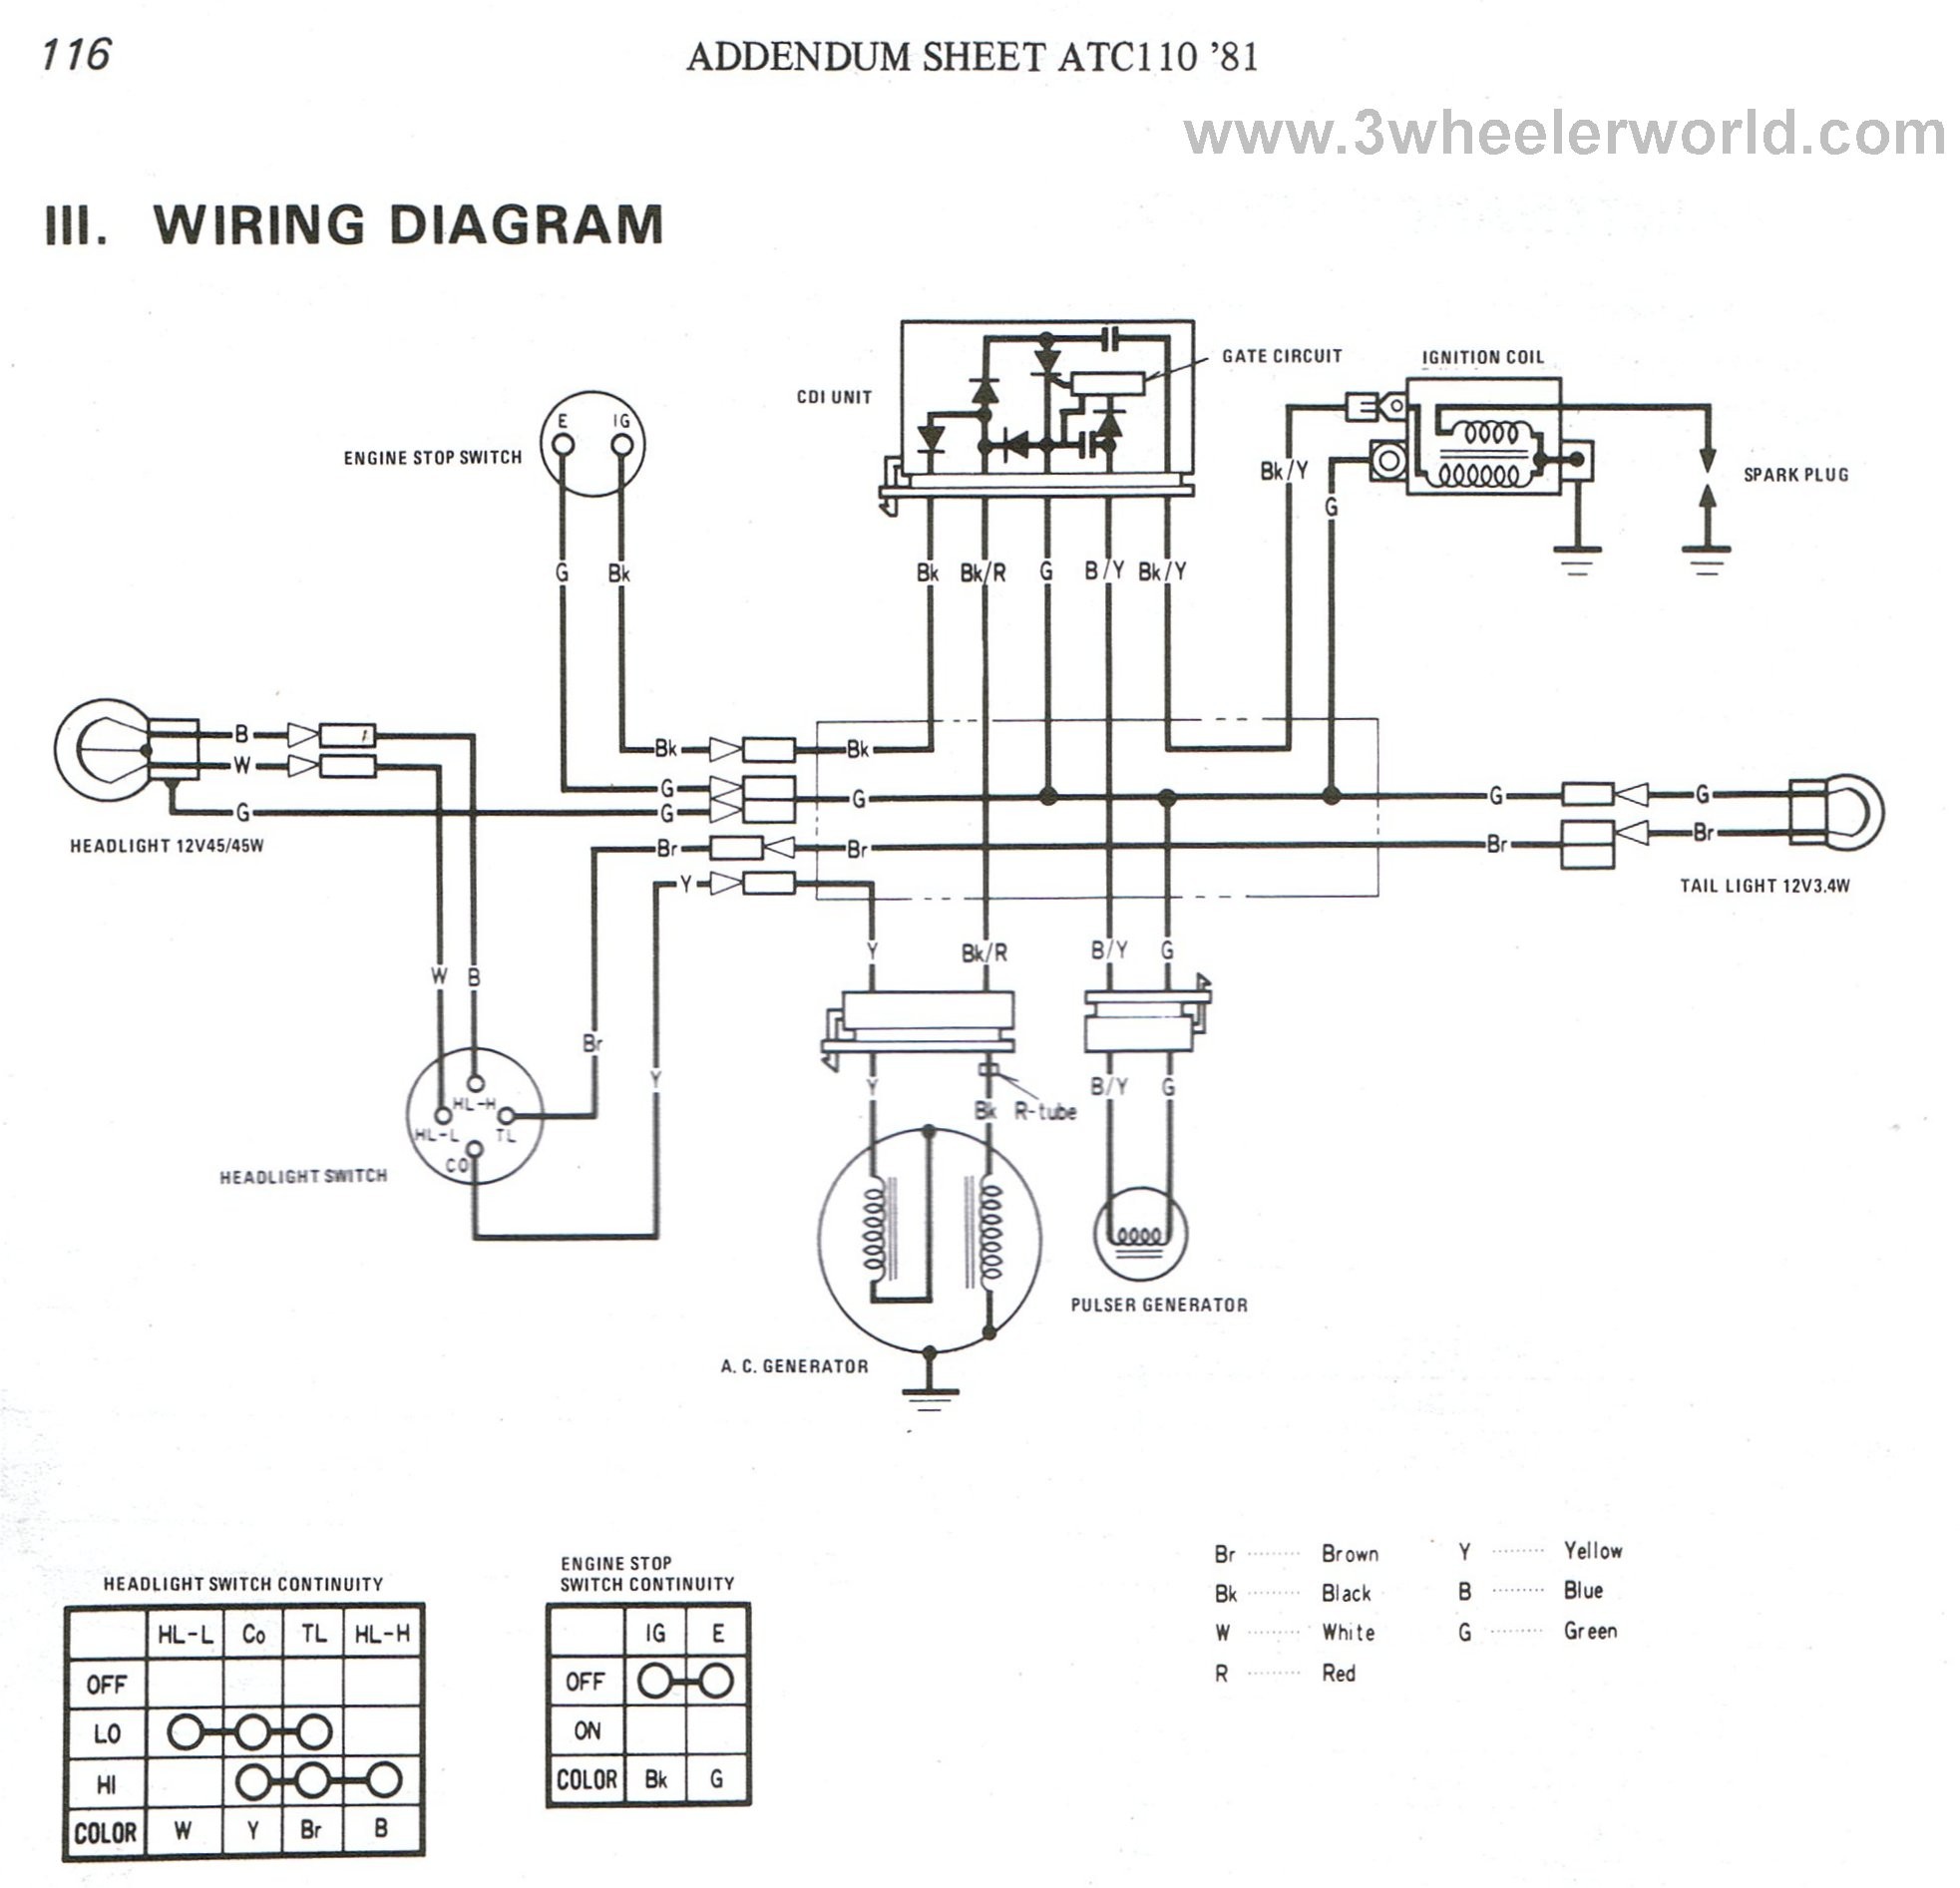 Honda Atv Wiring Diagram With Schematic Wenkm Incredible For Tao 125